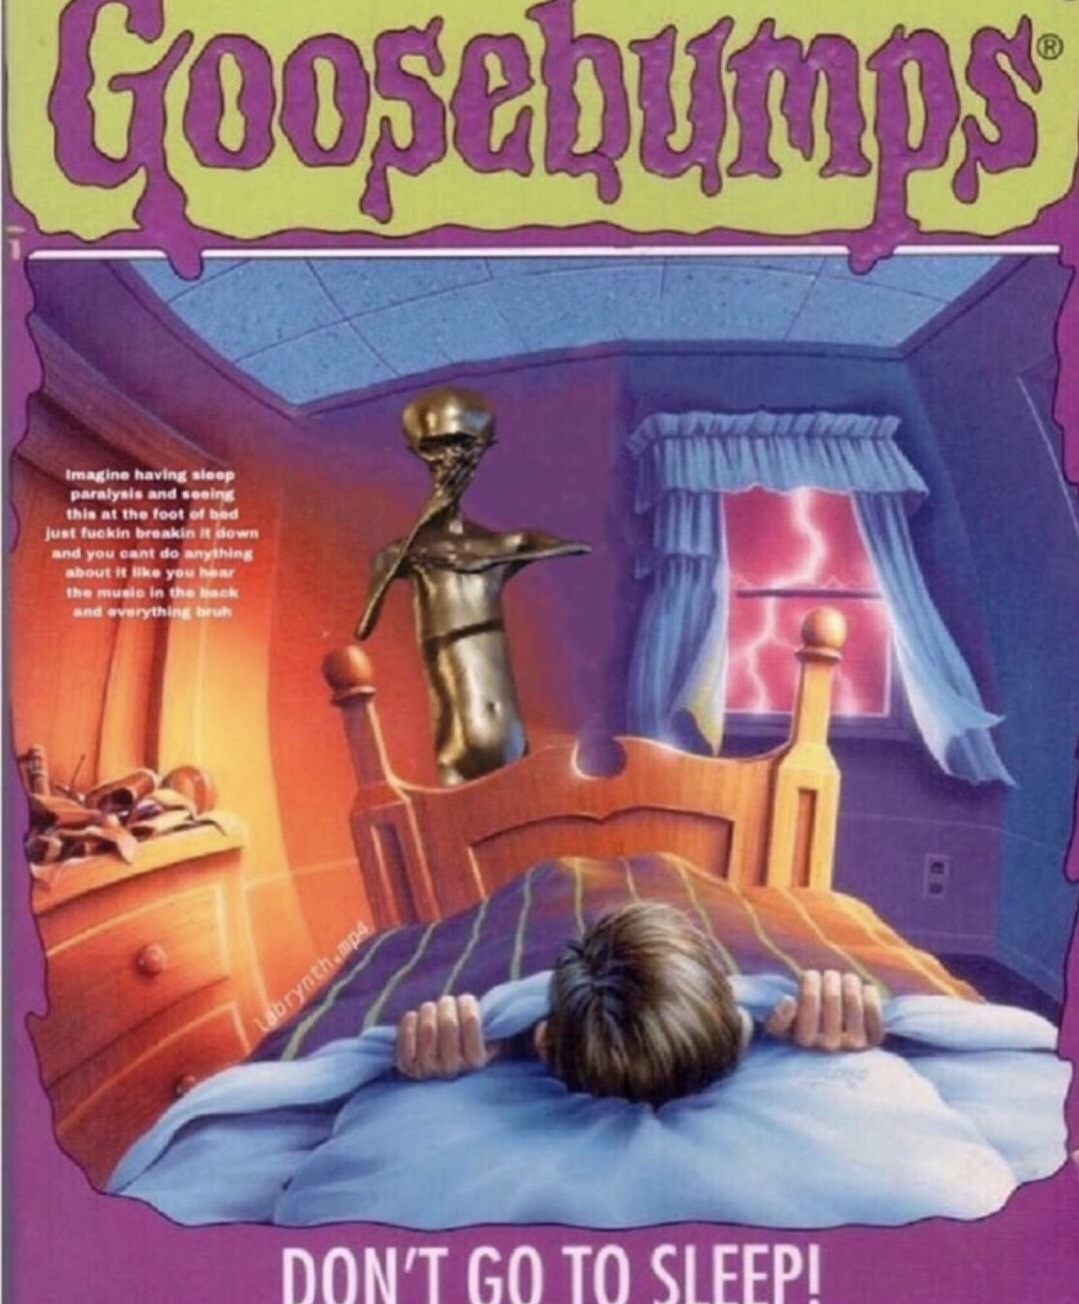 goosebumps don t go to sleep - Goosebumps Imagine having sleep paralysis and seeing this at the foot of bed Just fuckin breakin kdown and you can do anything about it you he the music in the back and everything but Larynth. Don'T Go To Sleep!